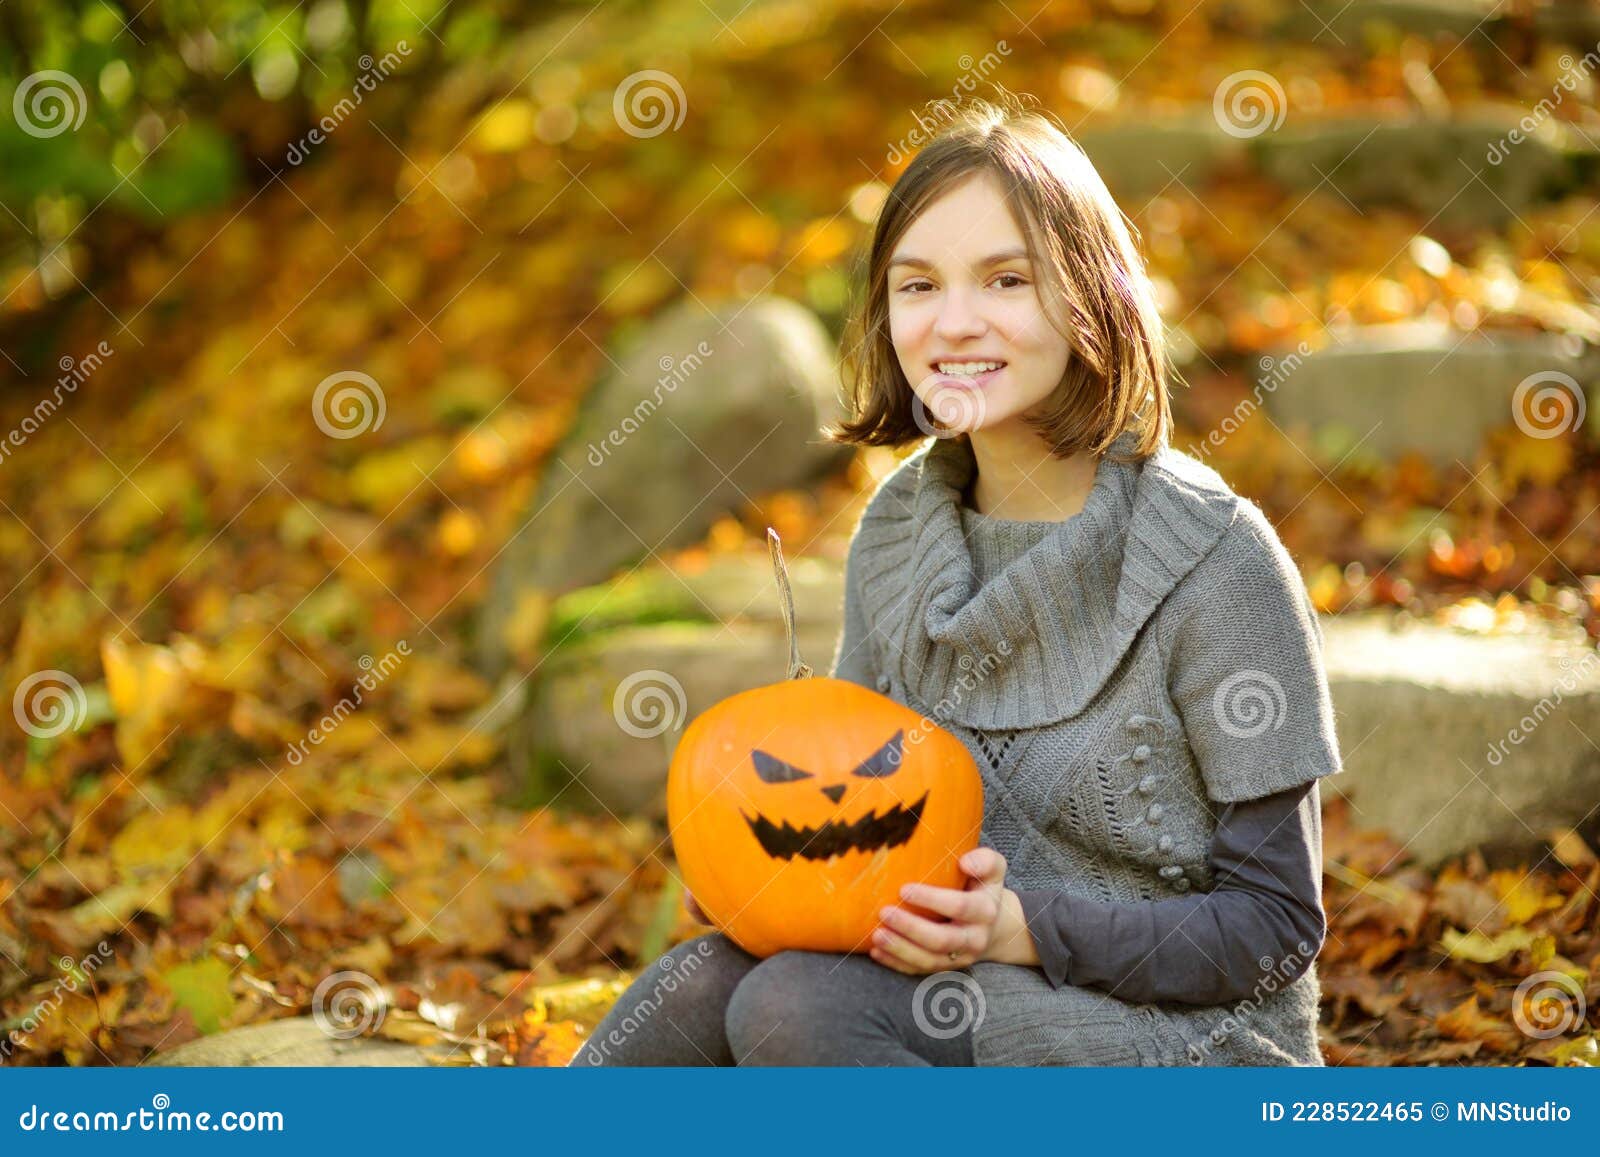 Cute Young Girl Holding a Small Pumpkin with Painted Scary Face on ...